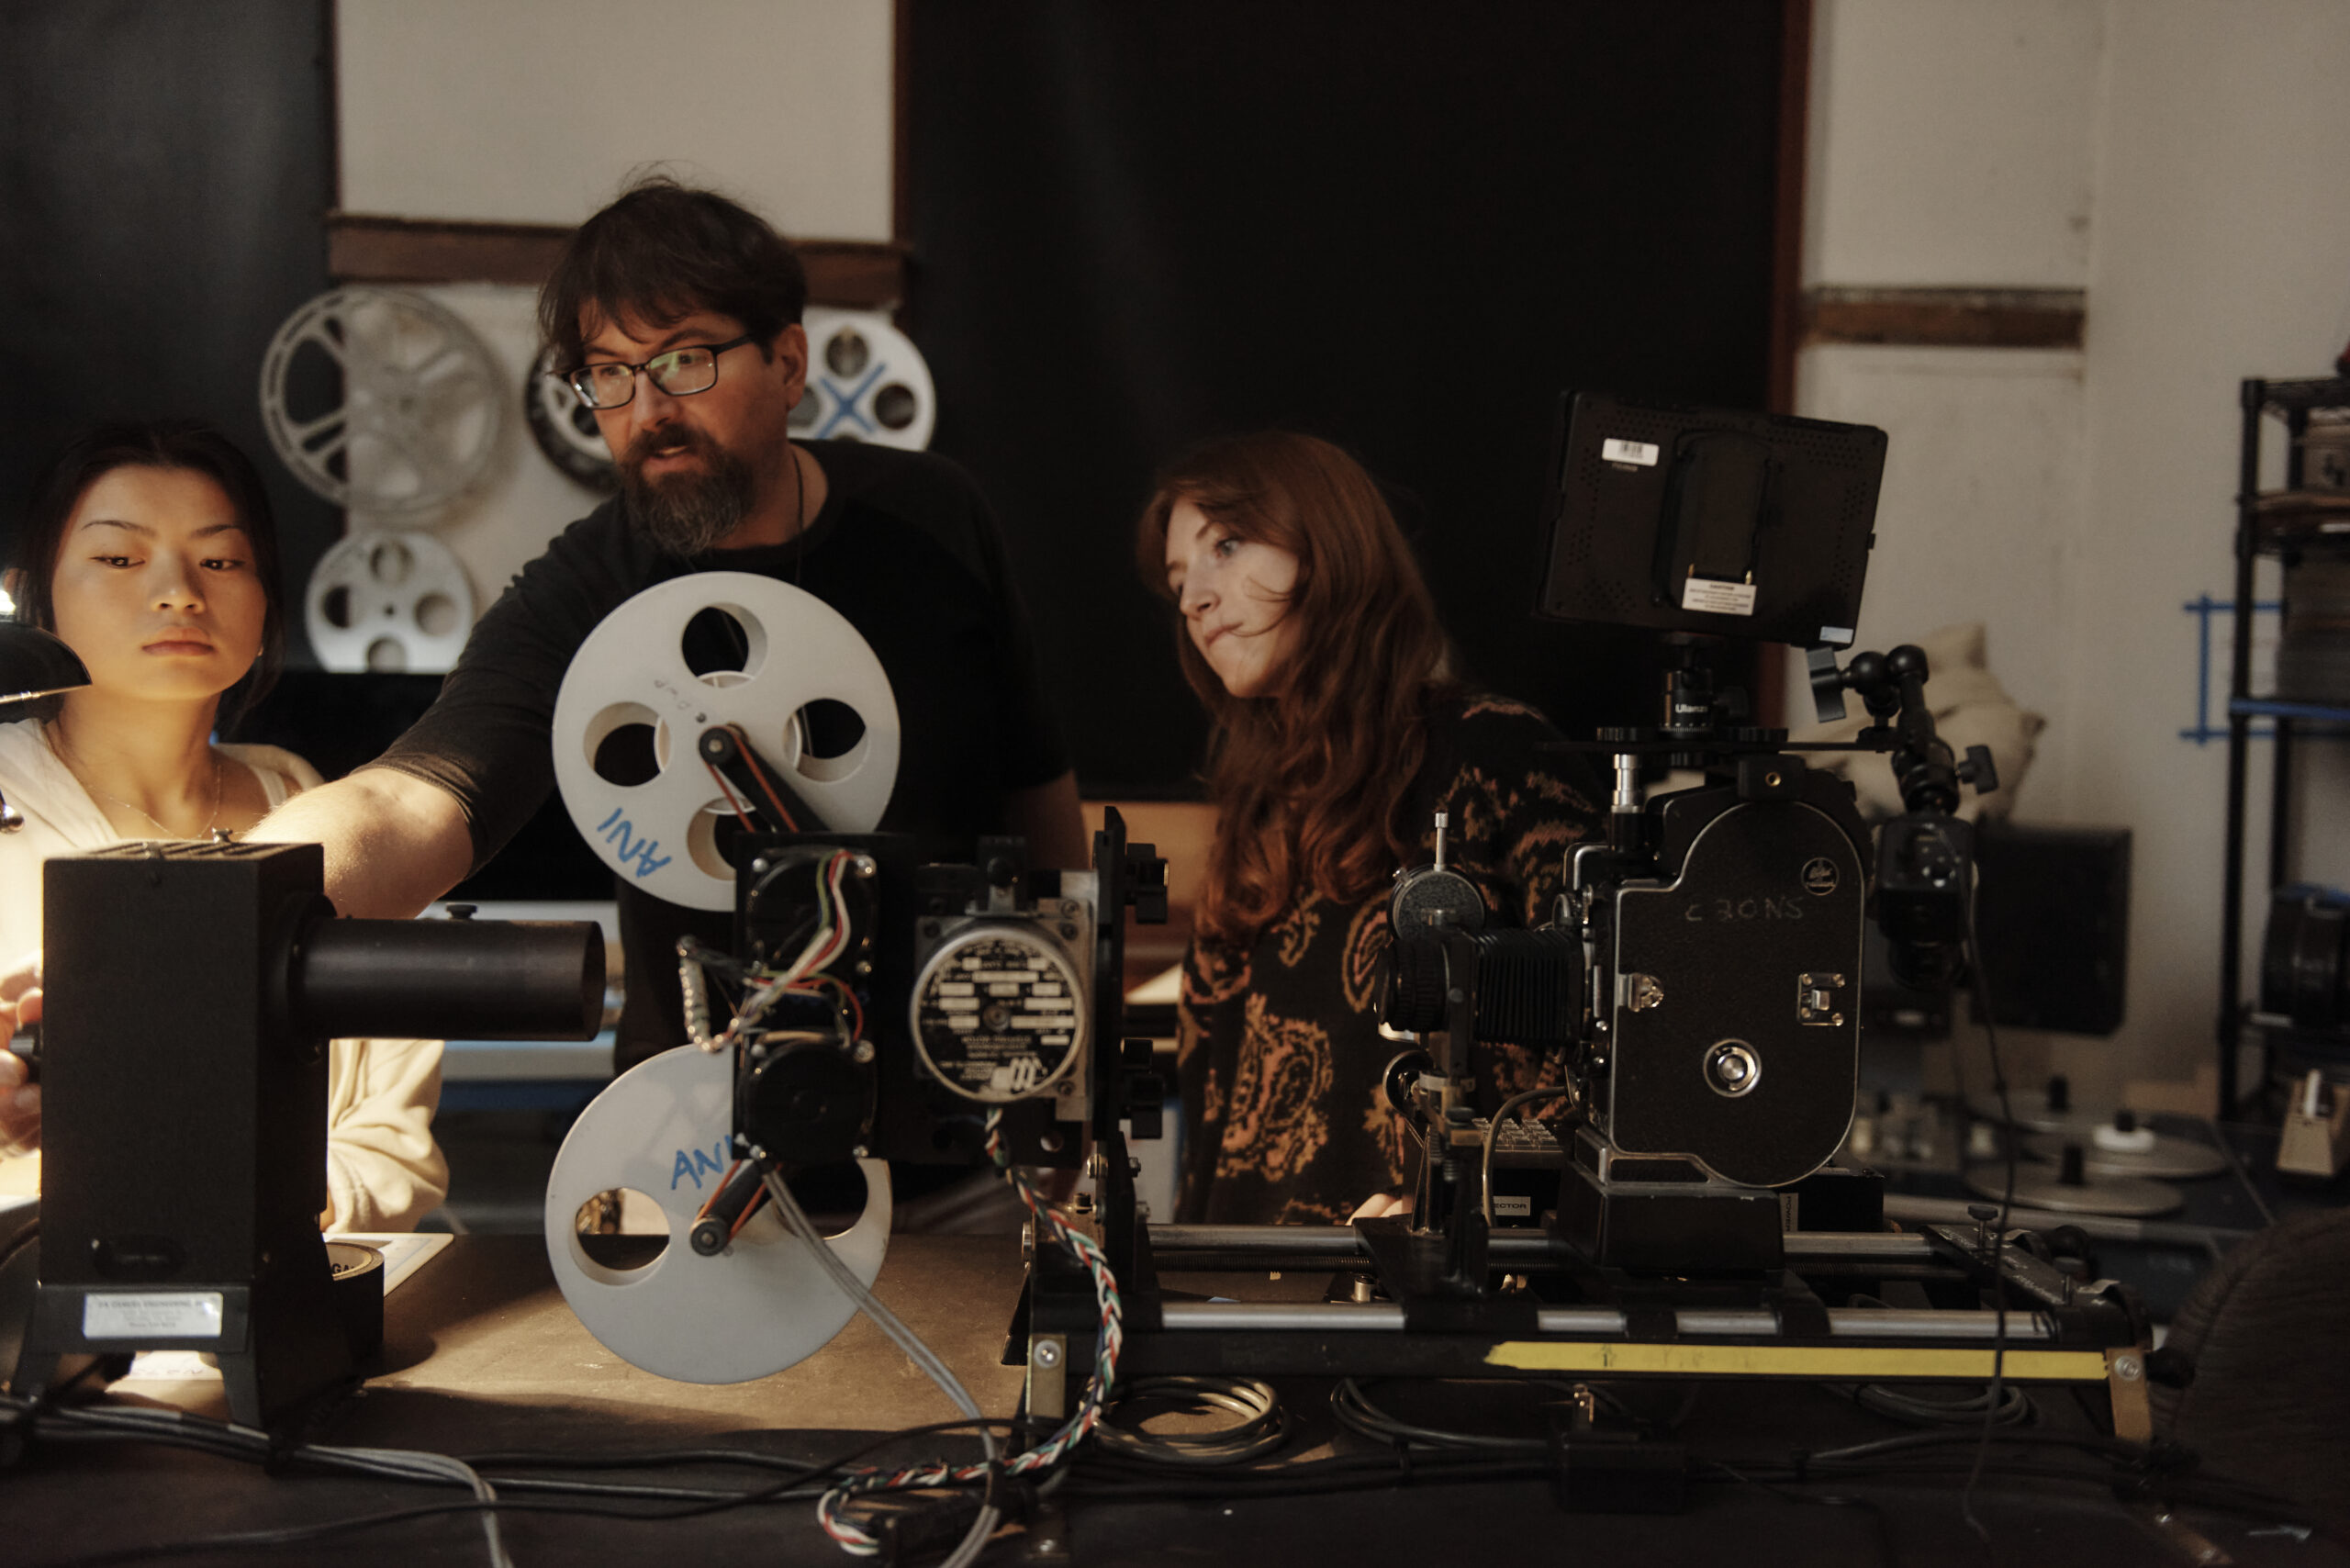 A professor shows two students how to use a film projector